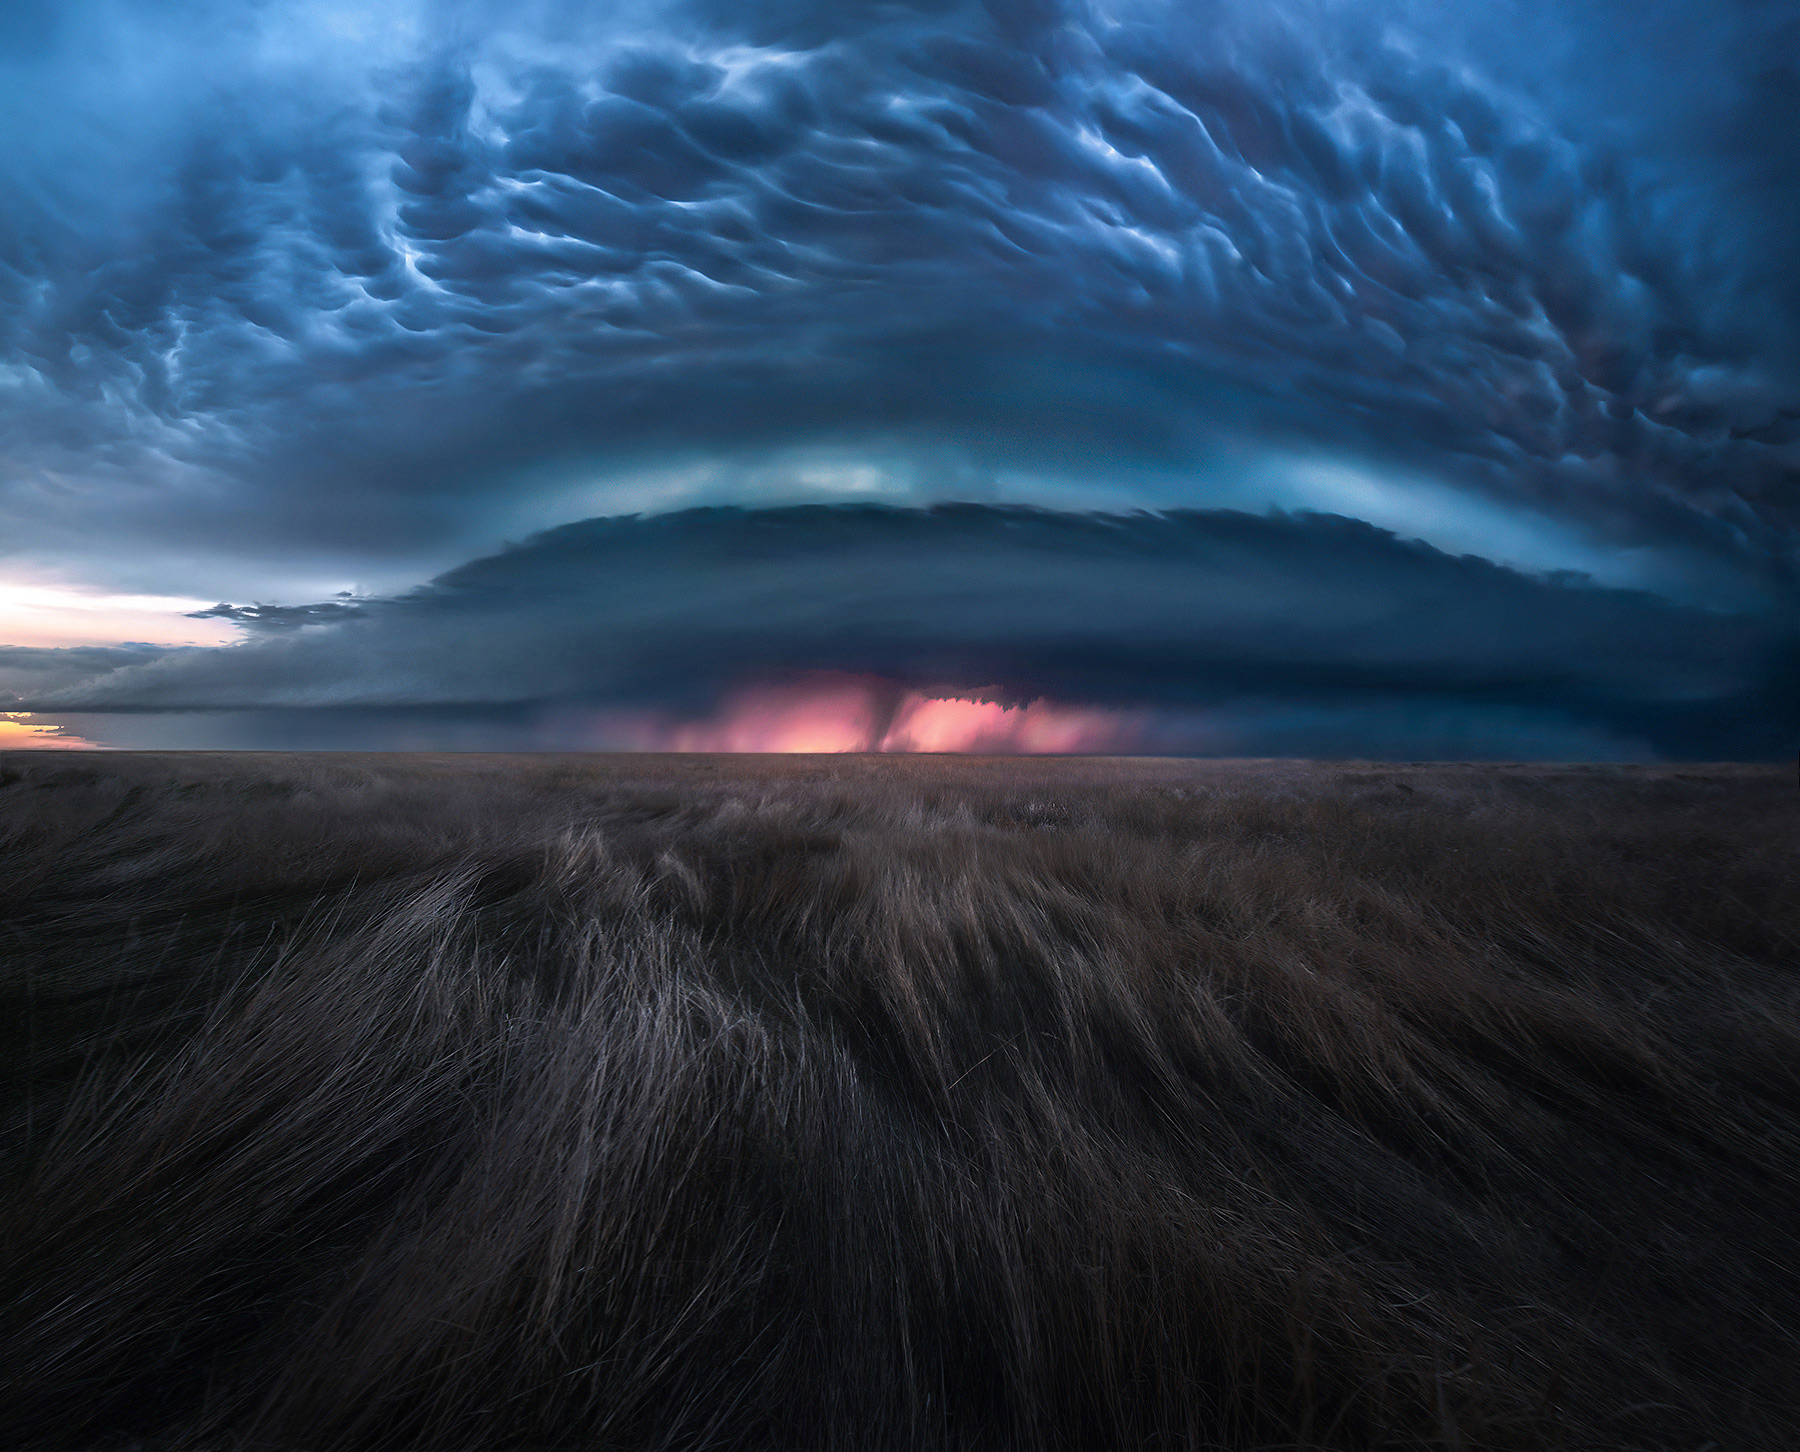 A supercell thunderstorm on the plains